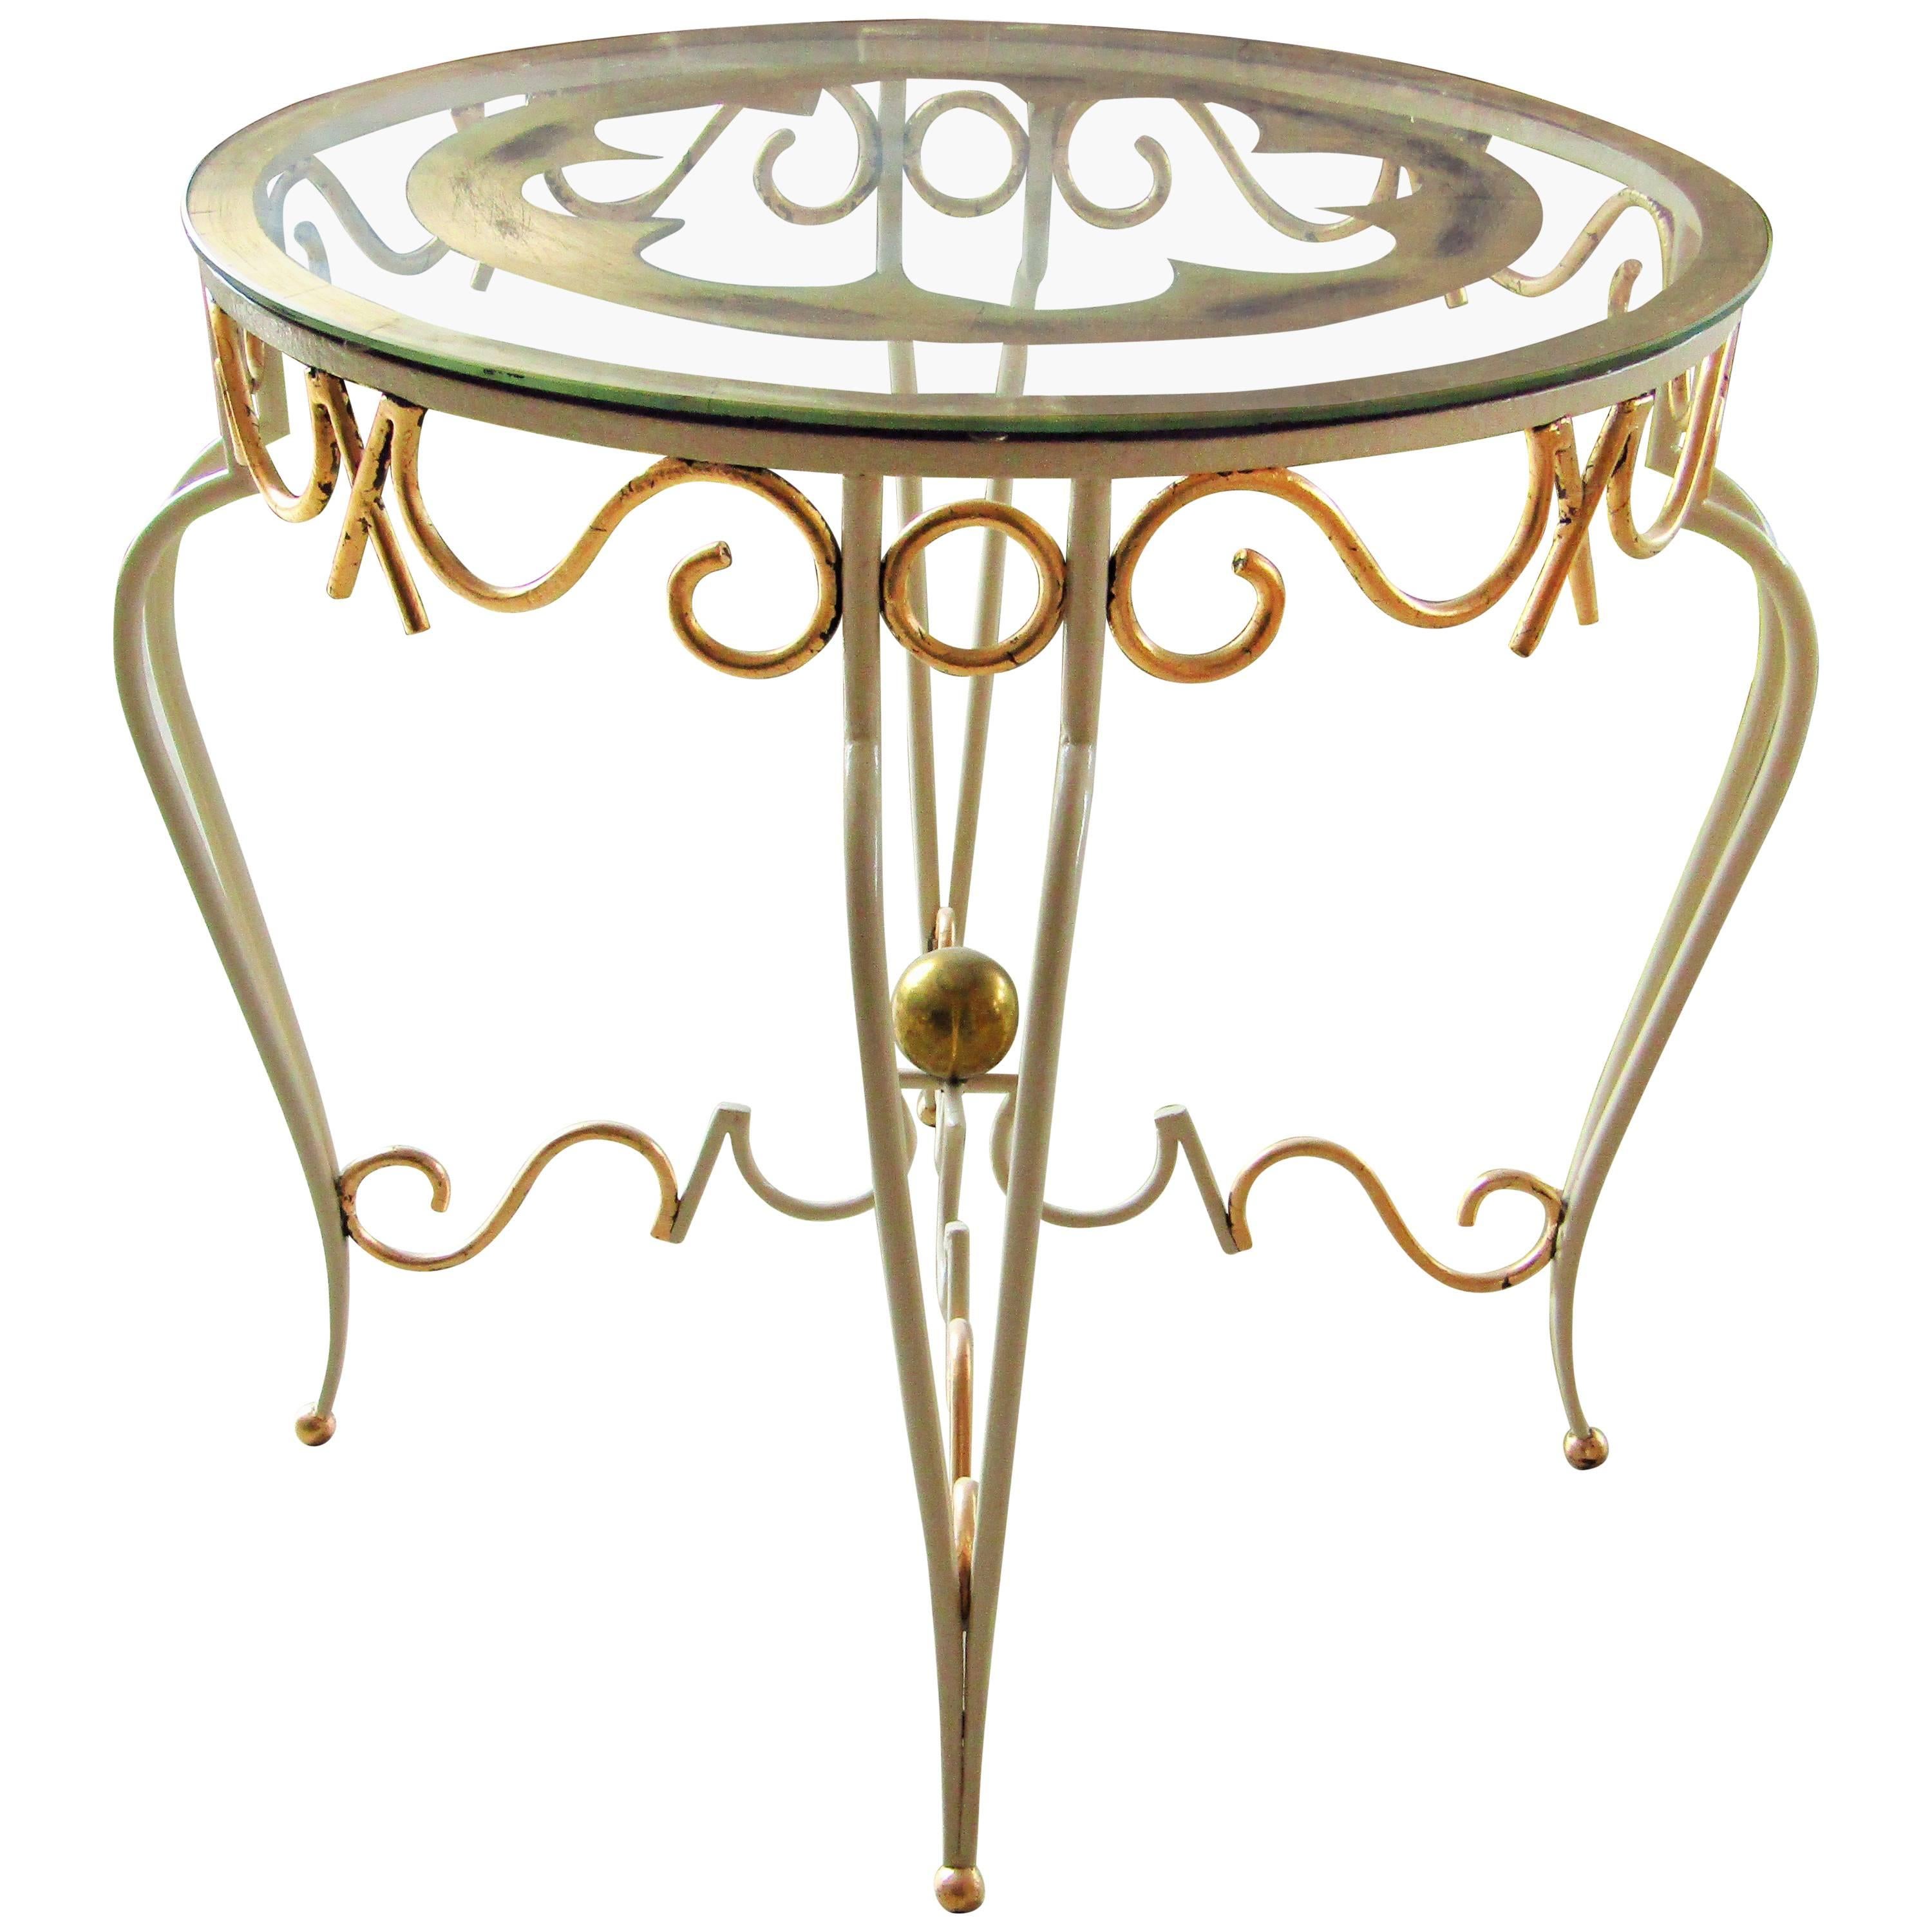 Art Deco Wrought Iron Table by Rene Prou